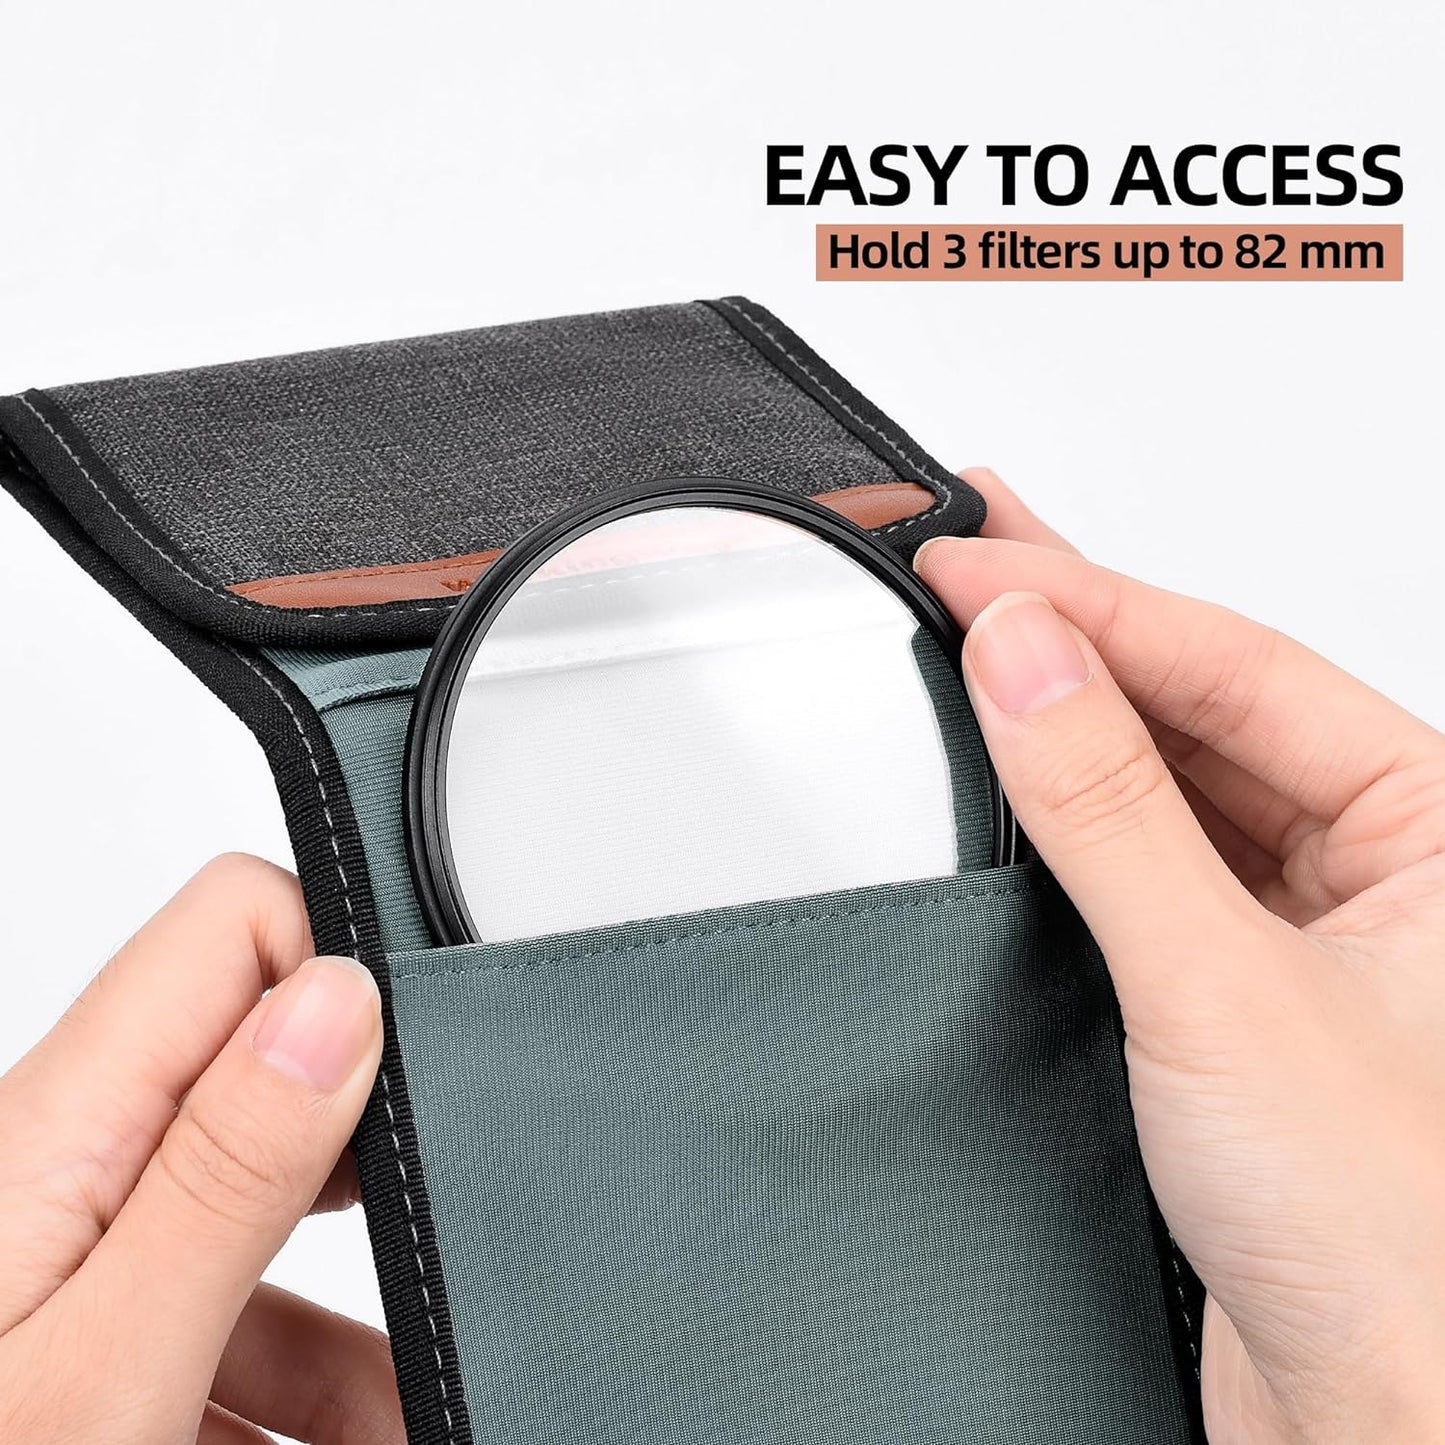 3 Pocket Pouch Case for Round Lens Filter Photography Walking Way